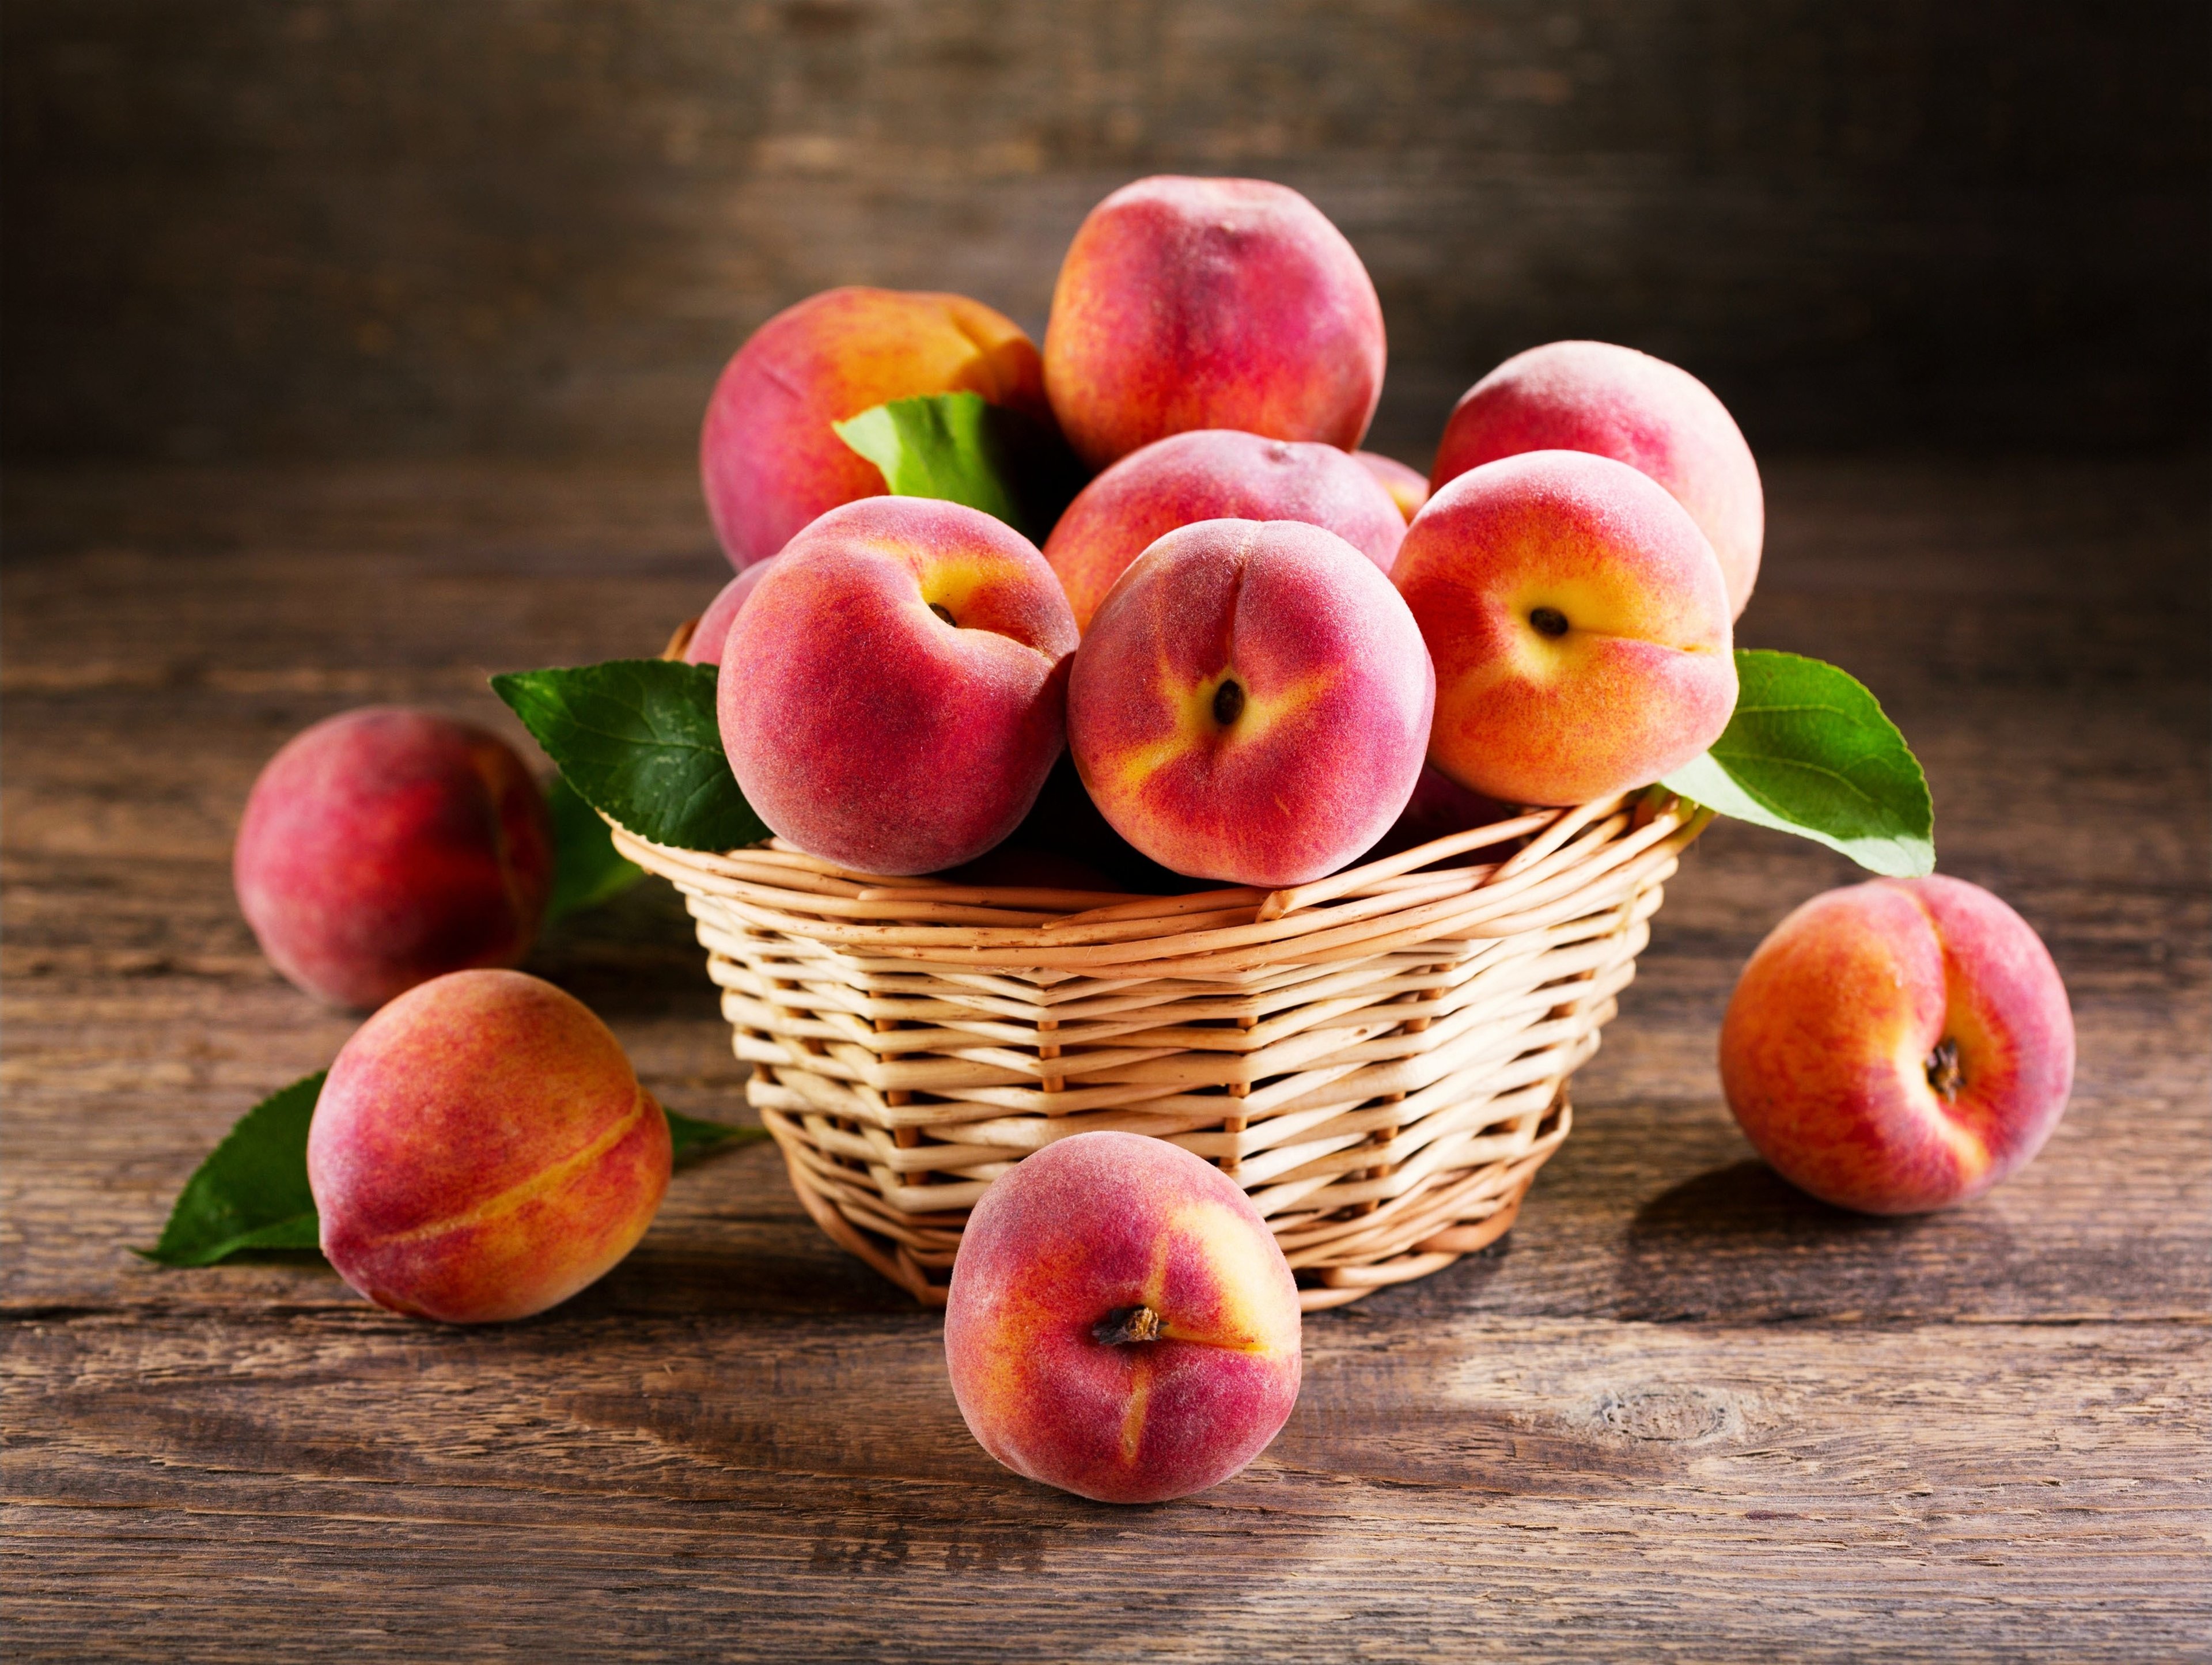 peaches, Table, Delicious, Summer, Fruits, Fresh, Basket, Food Wallpaper